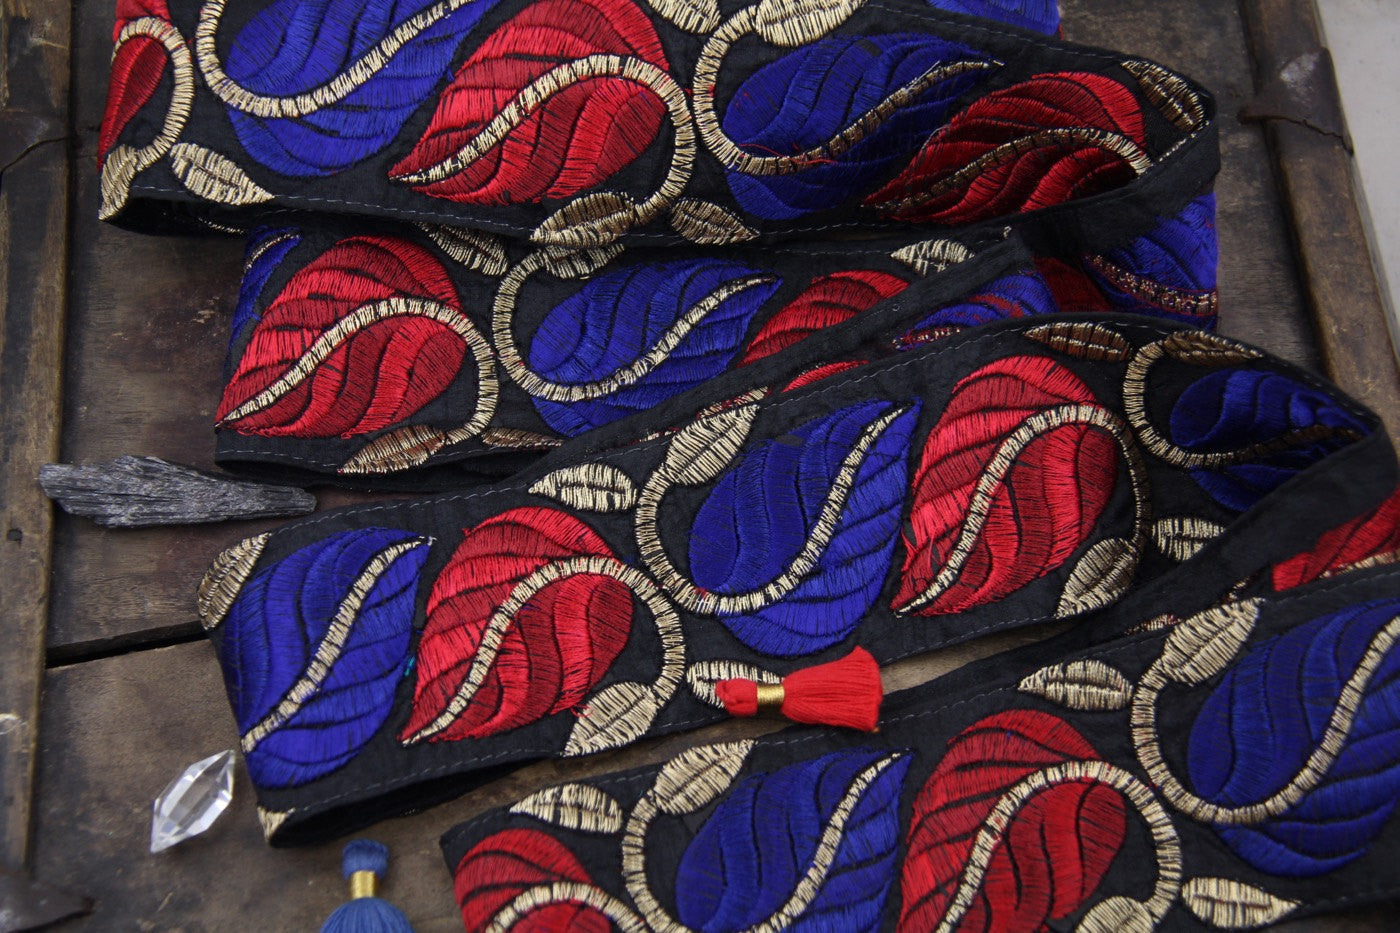 Regal Vines at Midnight: Black with Red, Blue, Gold leaves, Sari Border from India 2 1/2" x 1 yard, Ornate Winter Sewing Decorating Supply - ShopWomanShopsWorld.com. Bone Beads, Tassels, Pom Poms, African Beads.